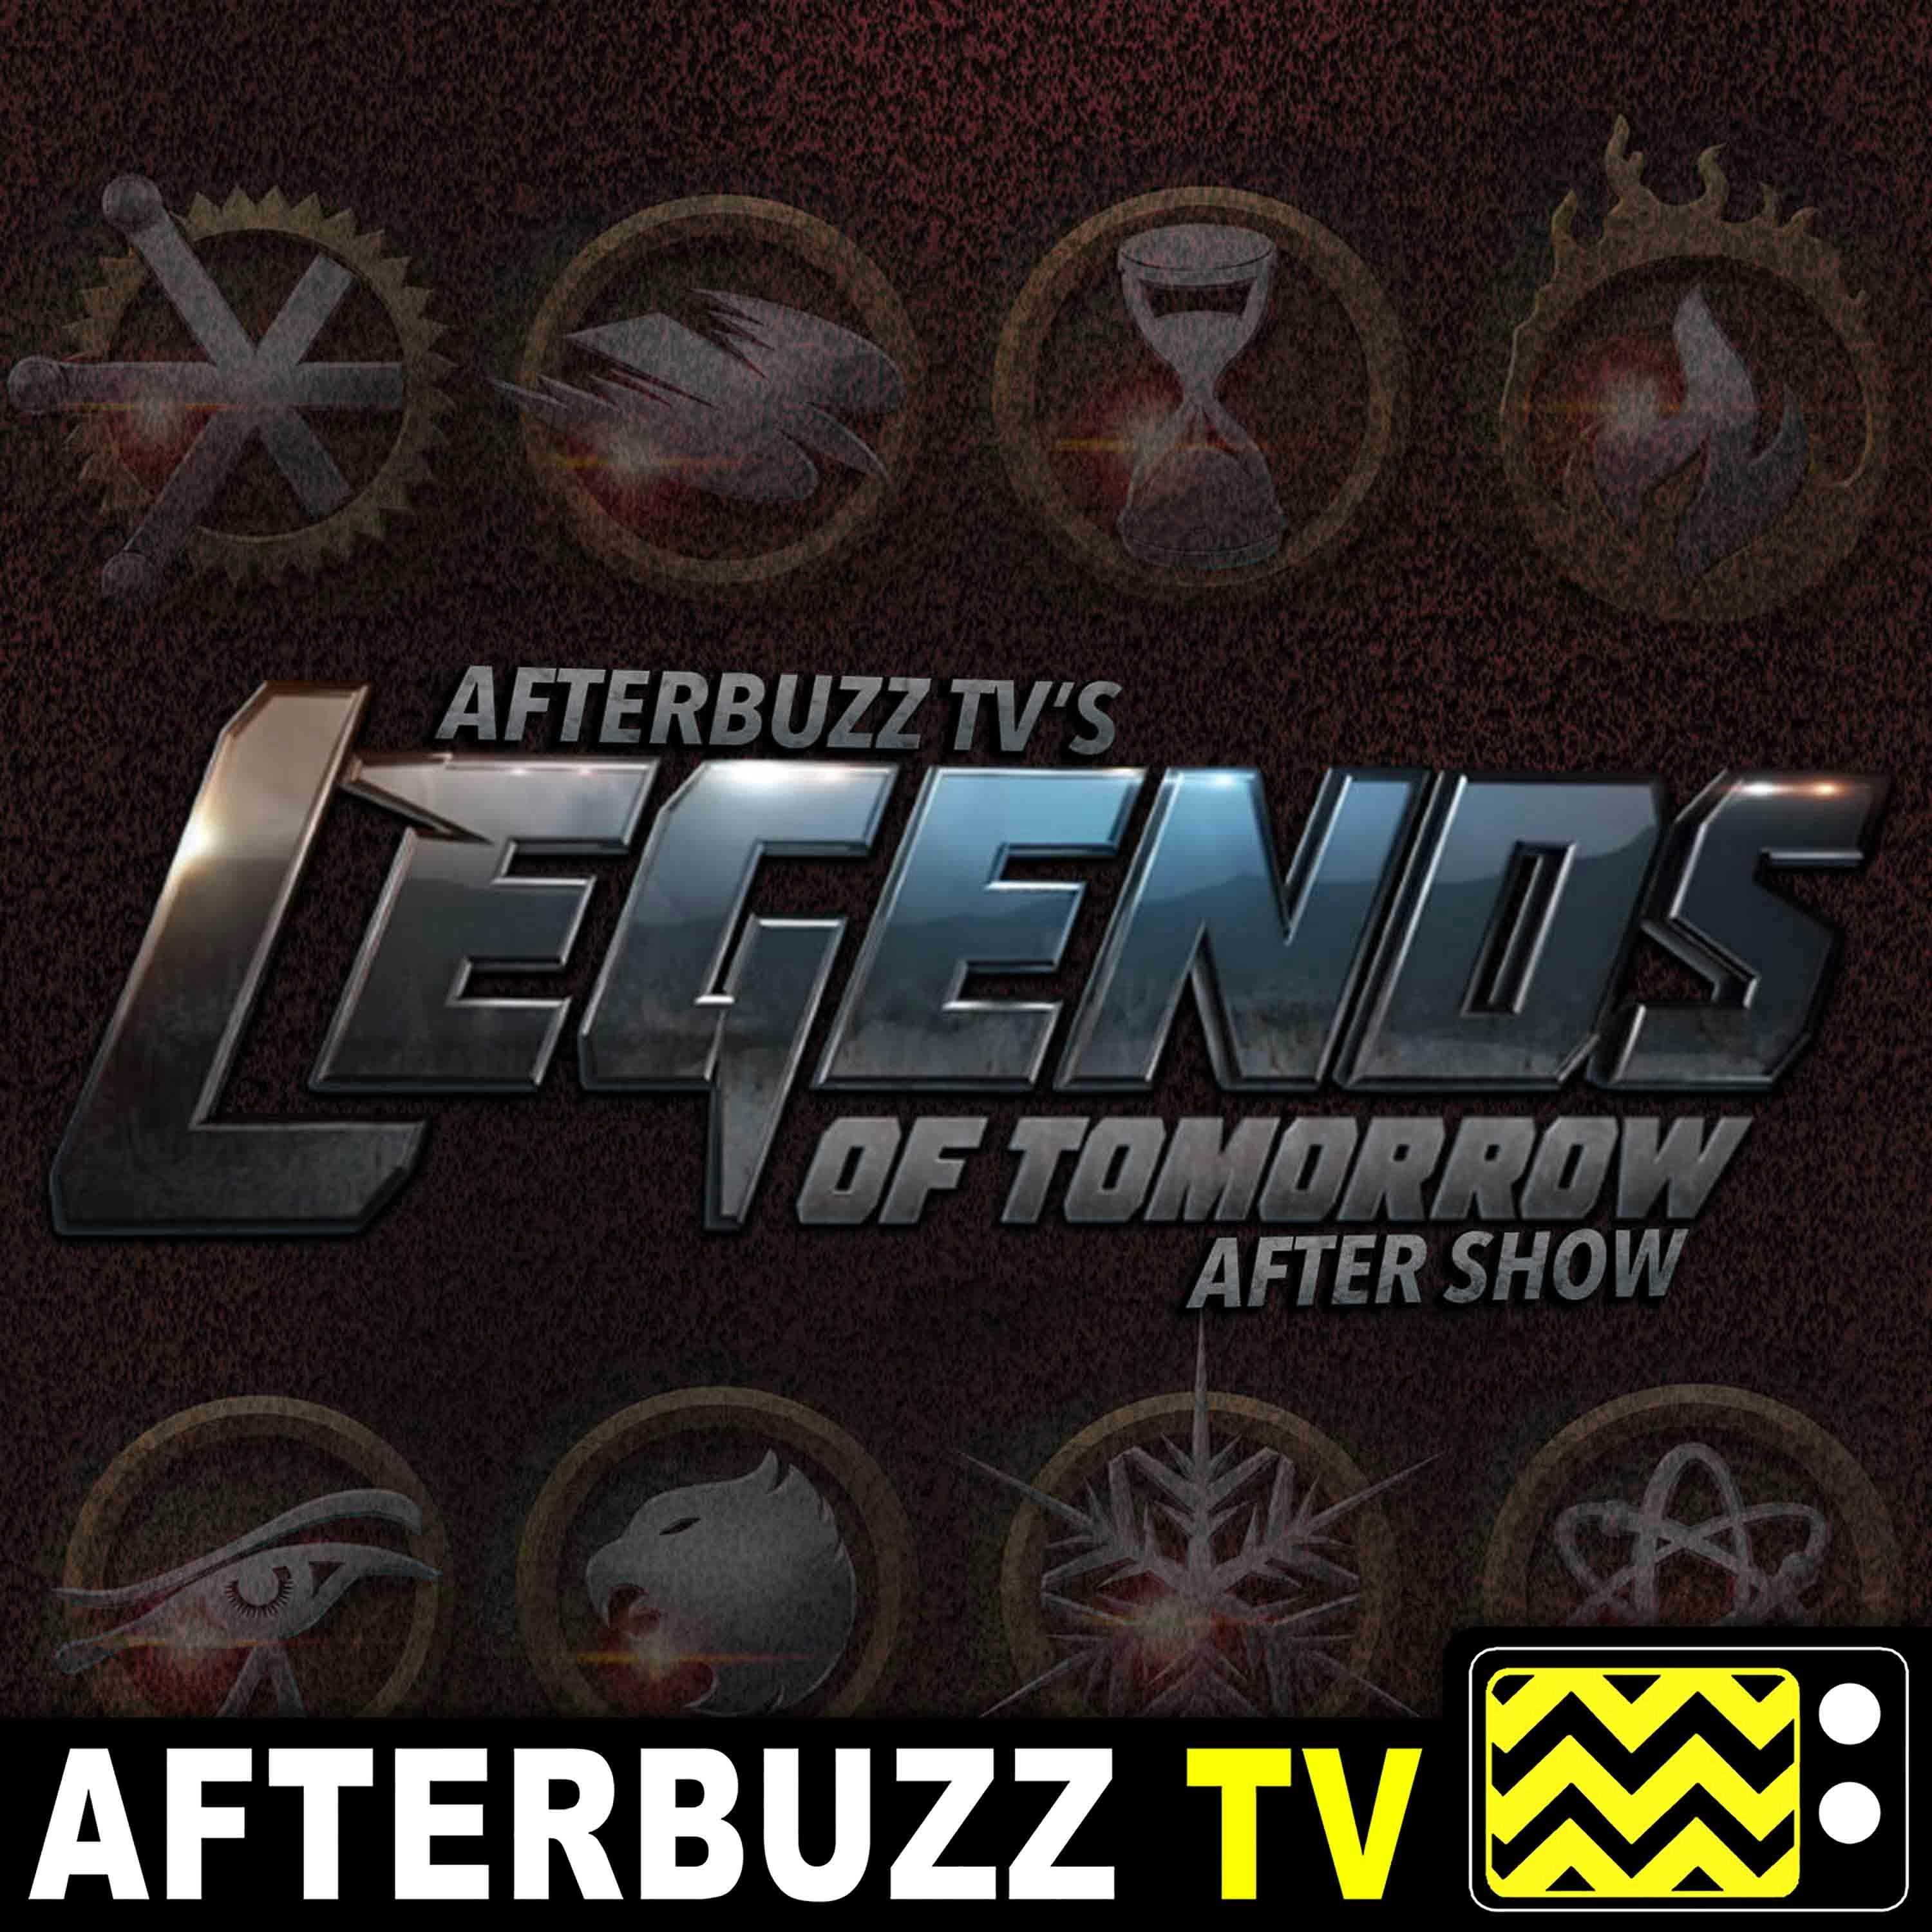 Legends Of Tomorrow S:1 | Night of the Hawk E:8 | AfterBuzz TV AfterShow